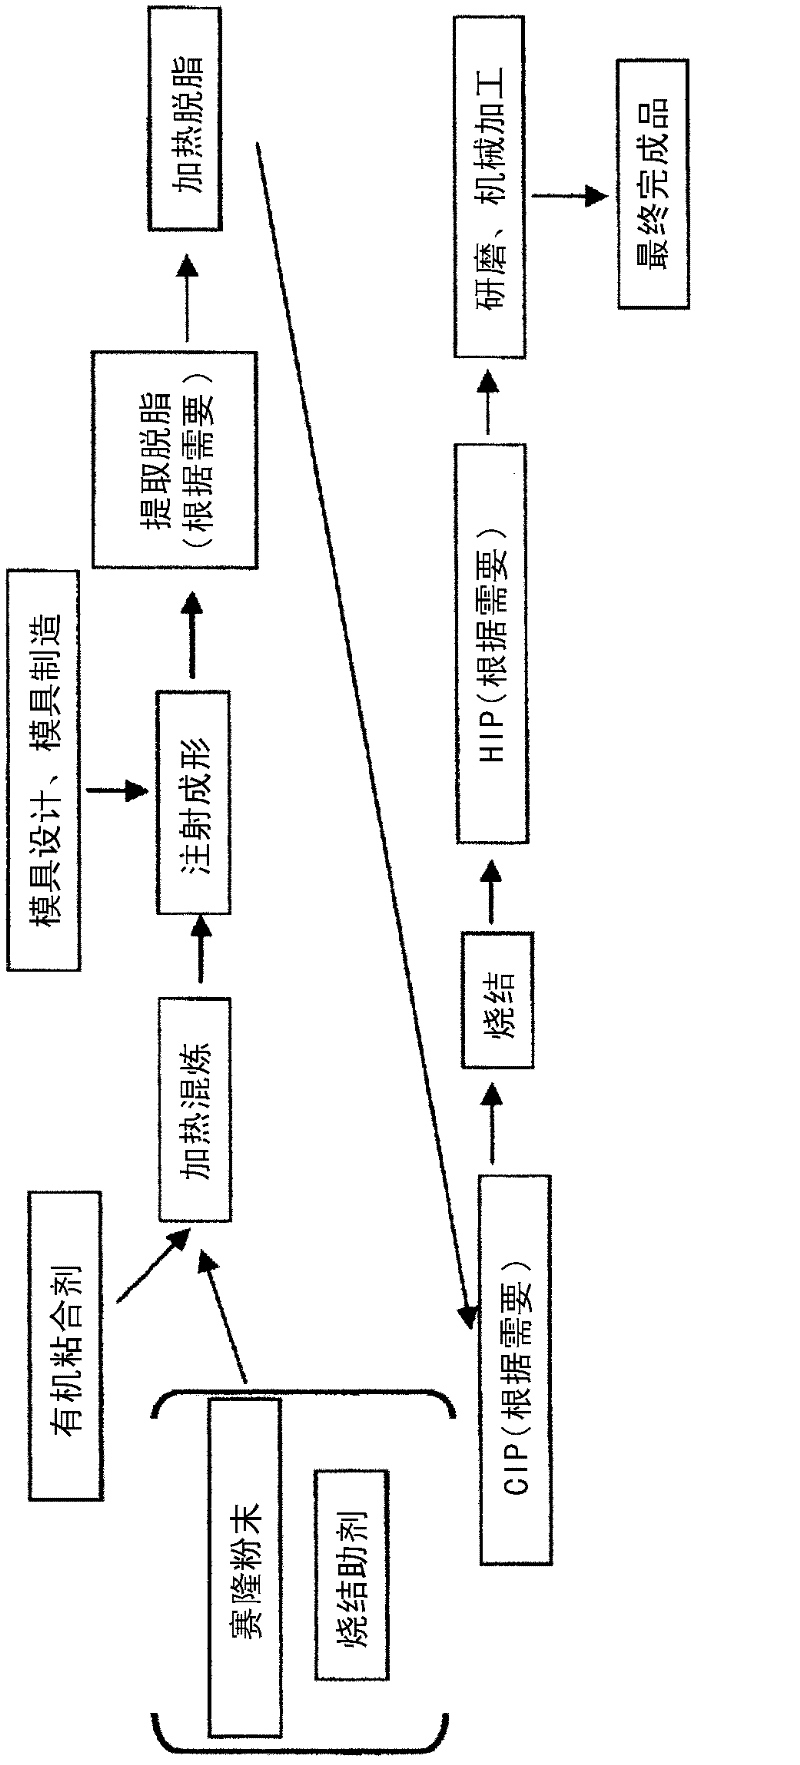 Process for producing sintered sialon ceramic